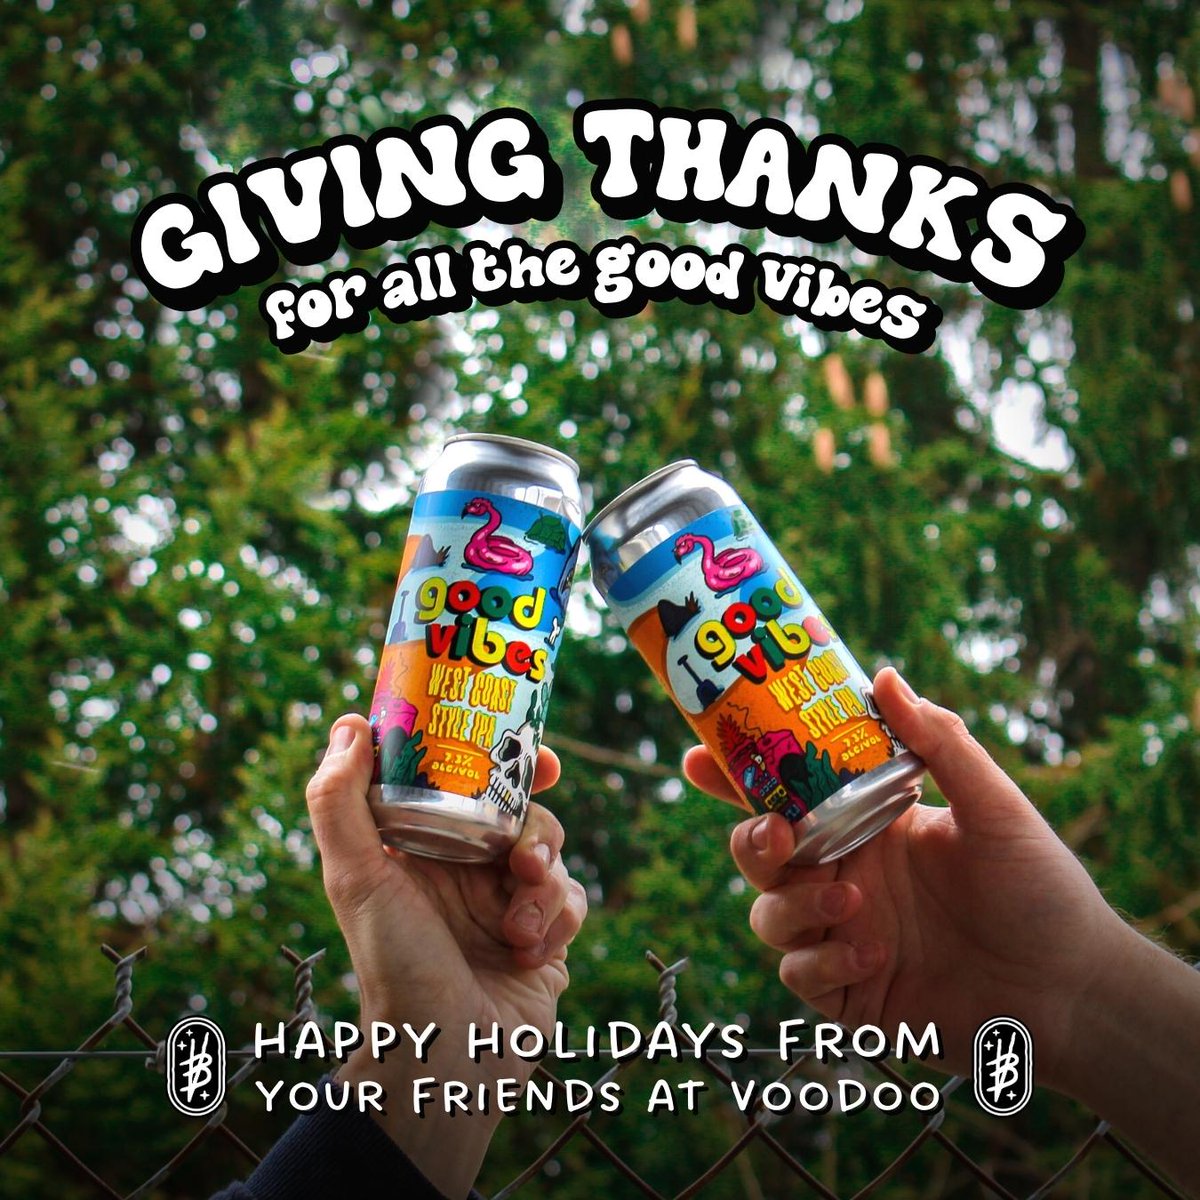 Today and everyday, we’re thankful for the good vibes we’re able share throughout the year. Spend some time with your friends and family and be good to one another today. Your friends at Voodoo wish you a safe and enjoyable Holiday.